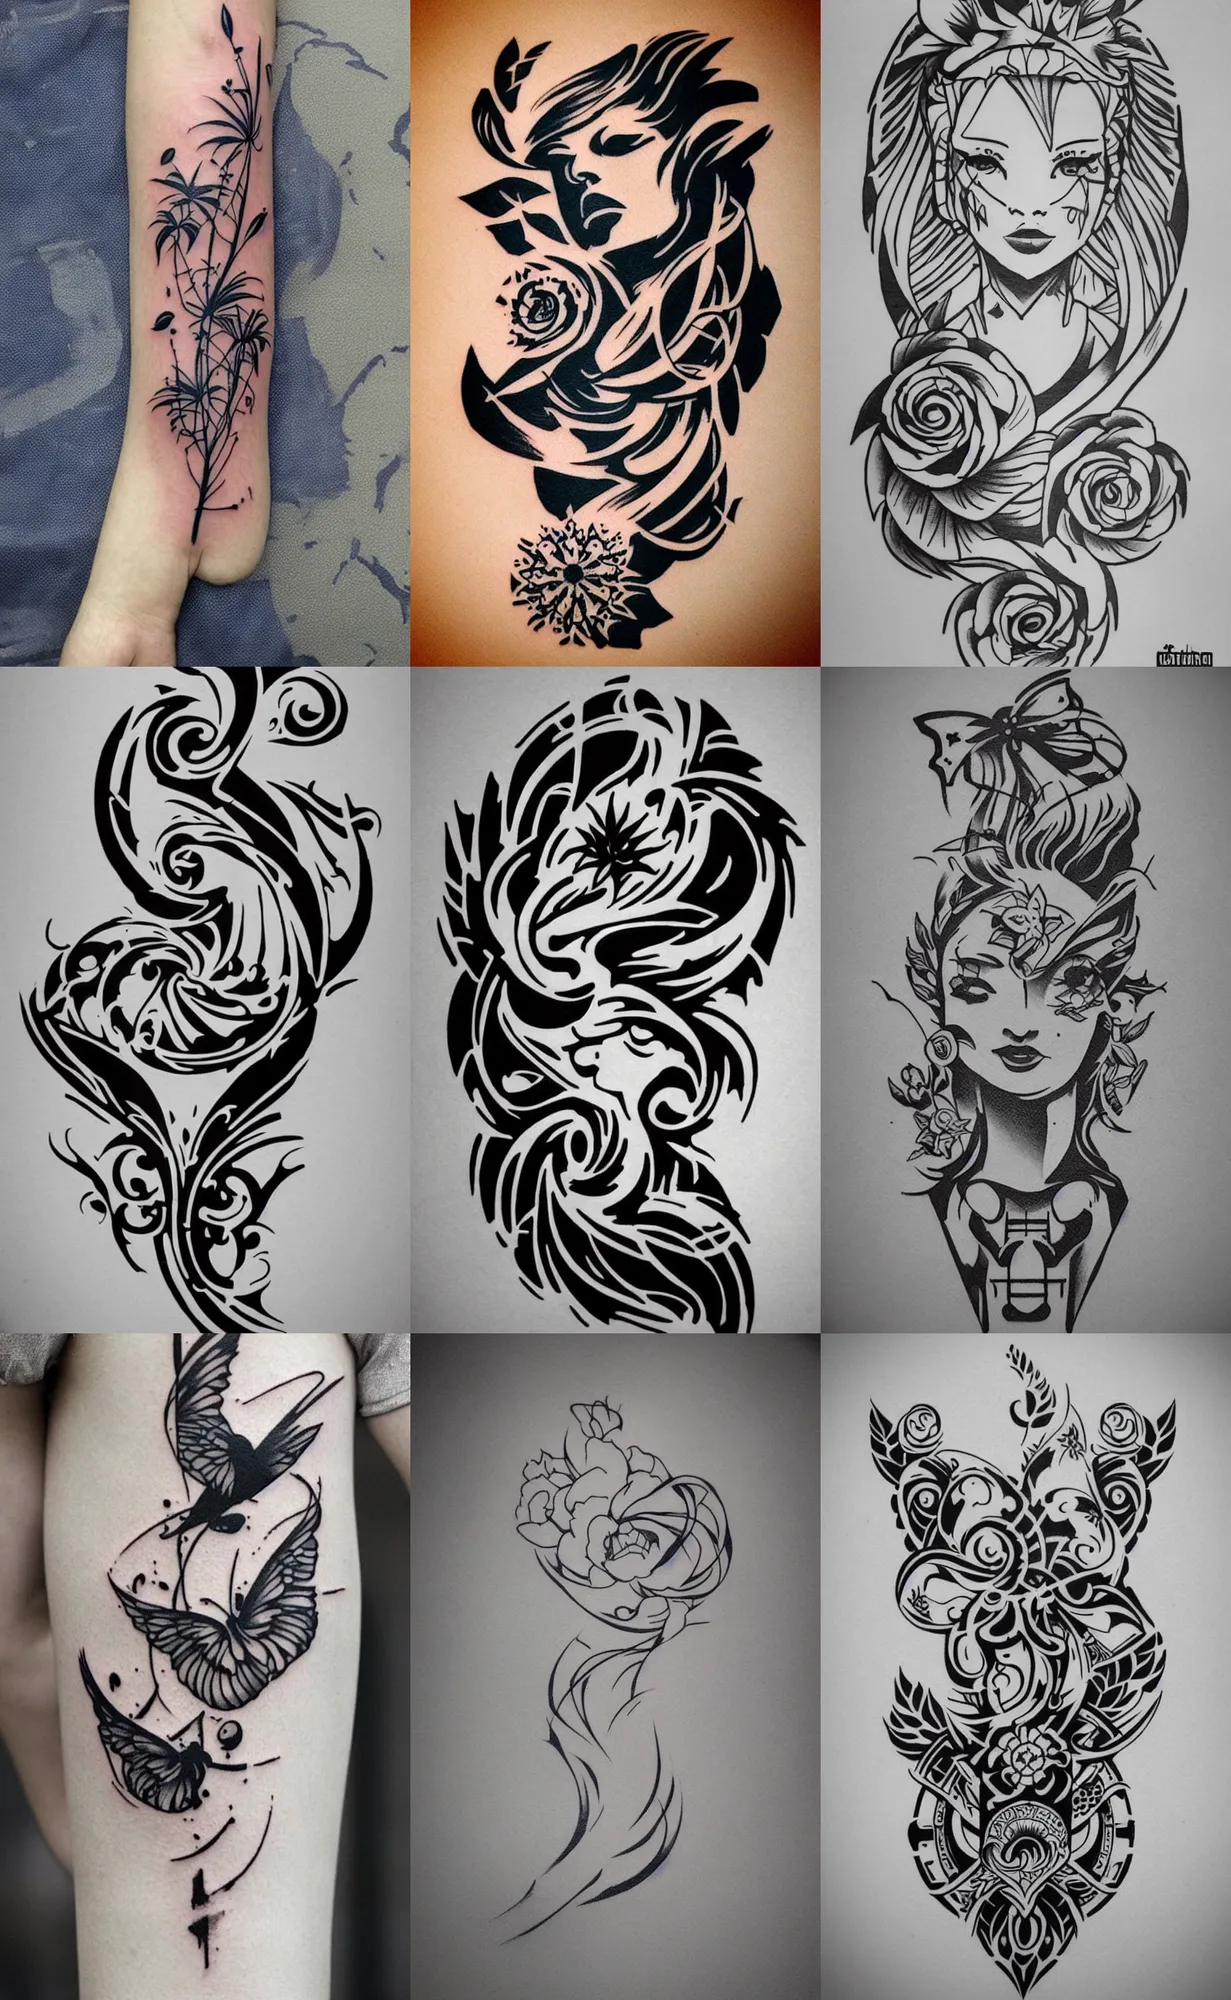 Create a tattoo stencil for thermal printing by Onepikes | Fiverr